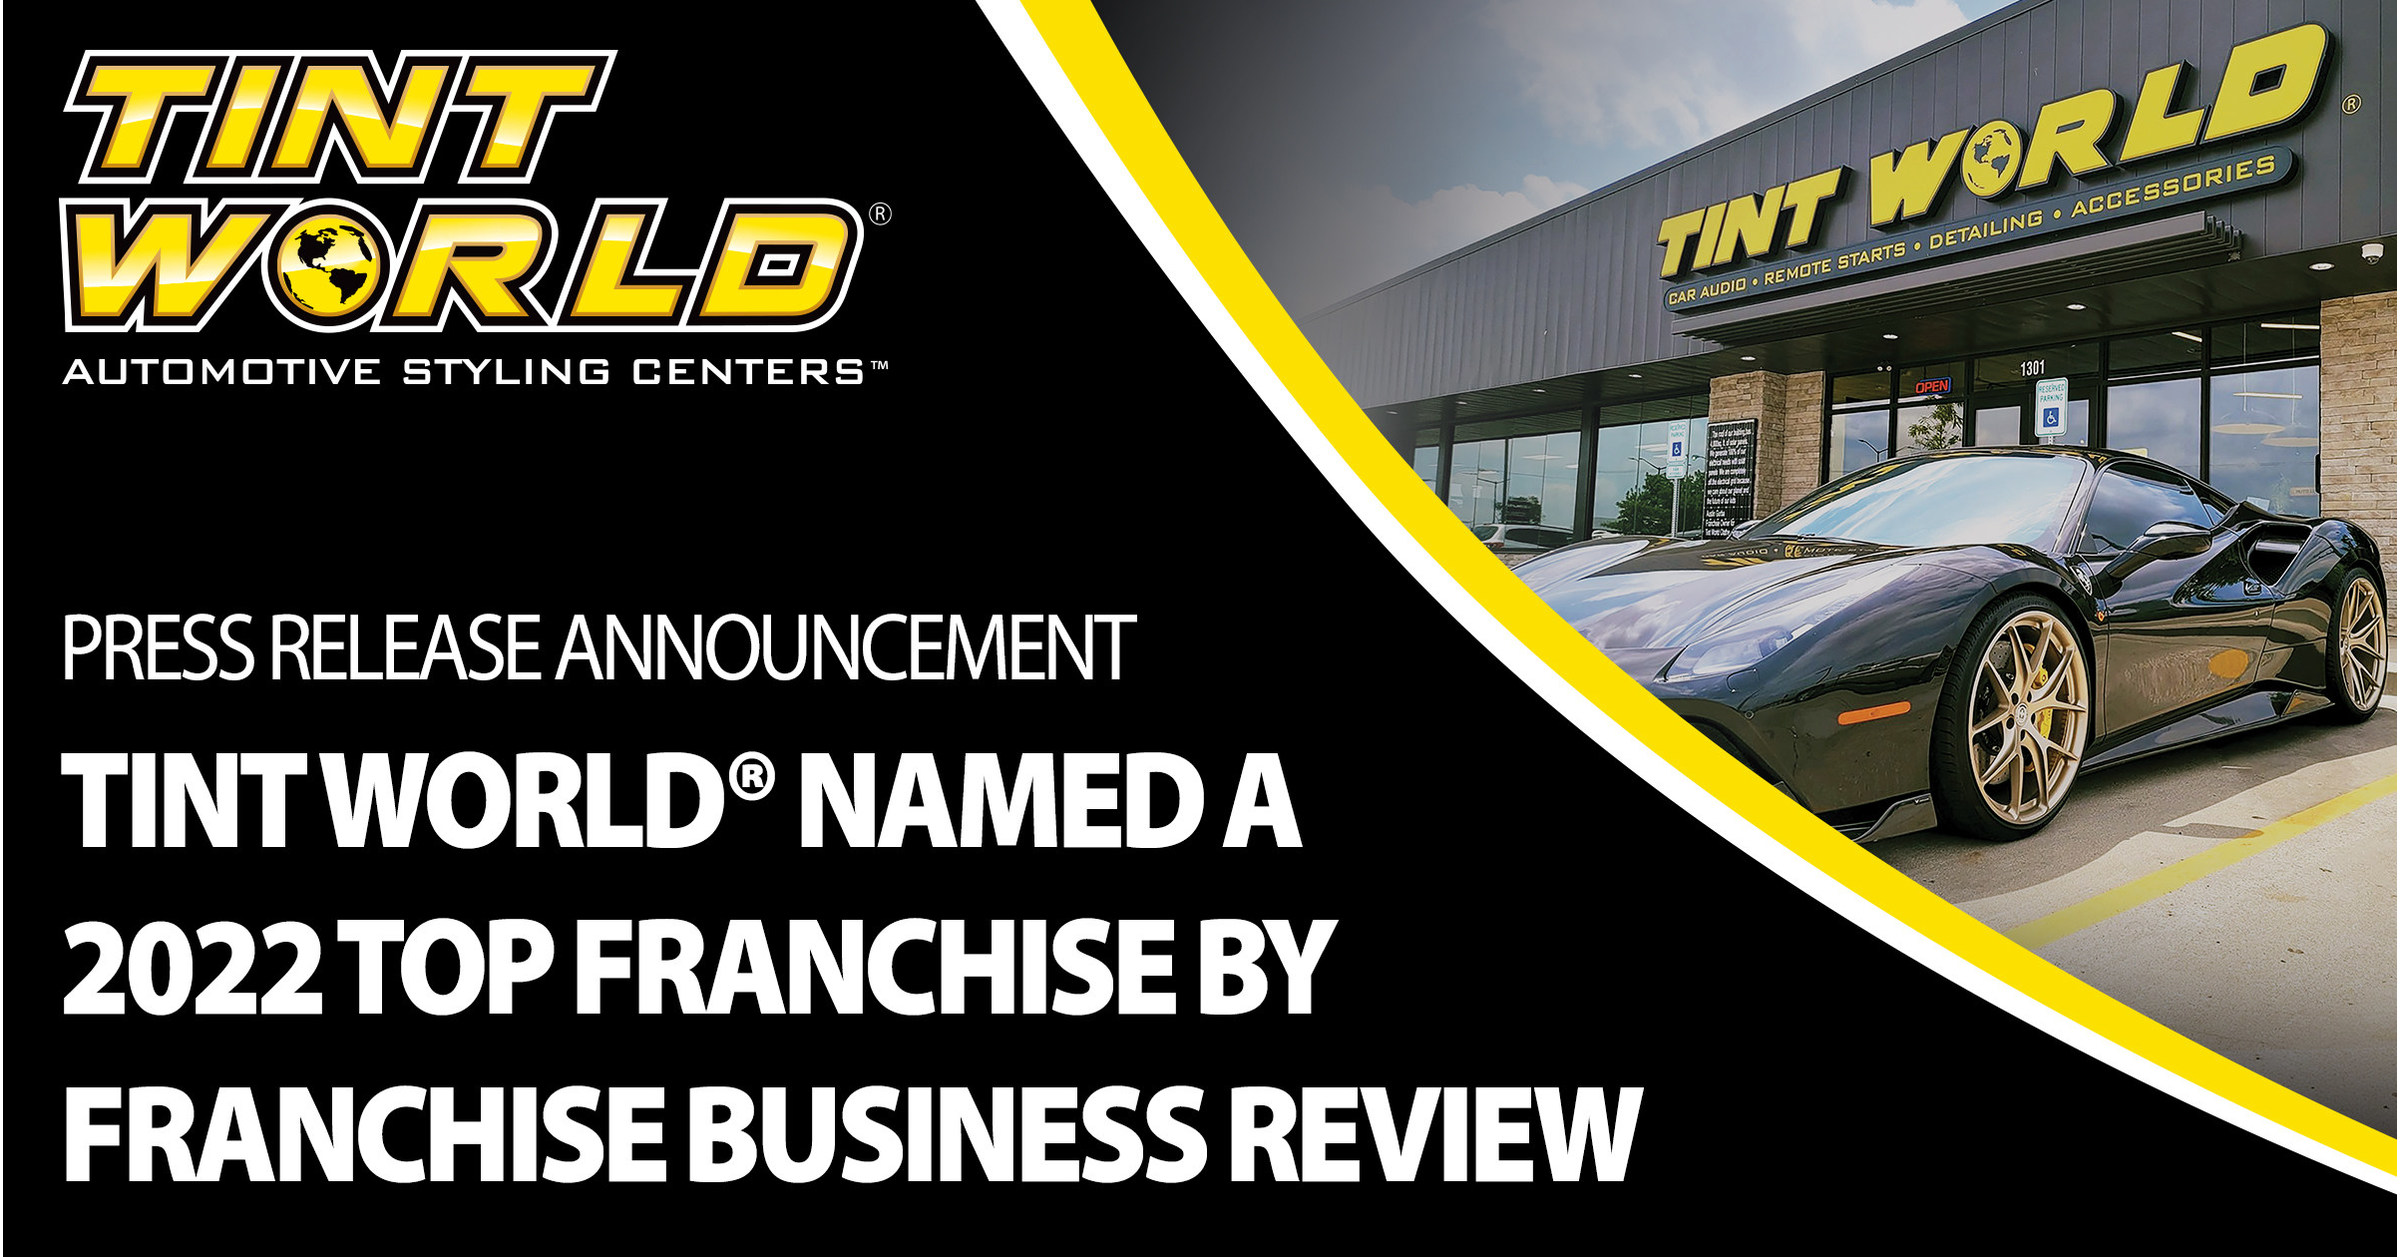 Tint World® Named a 2022 Top Franchise by Franchise Business Review